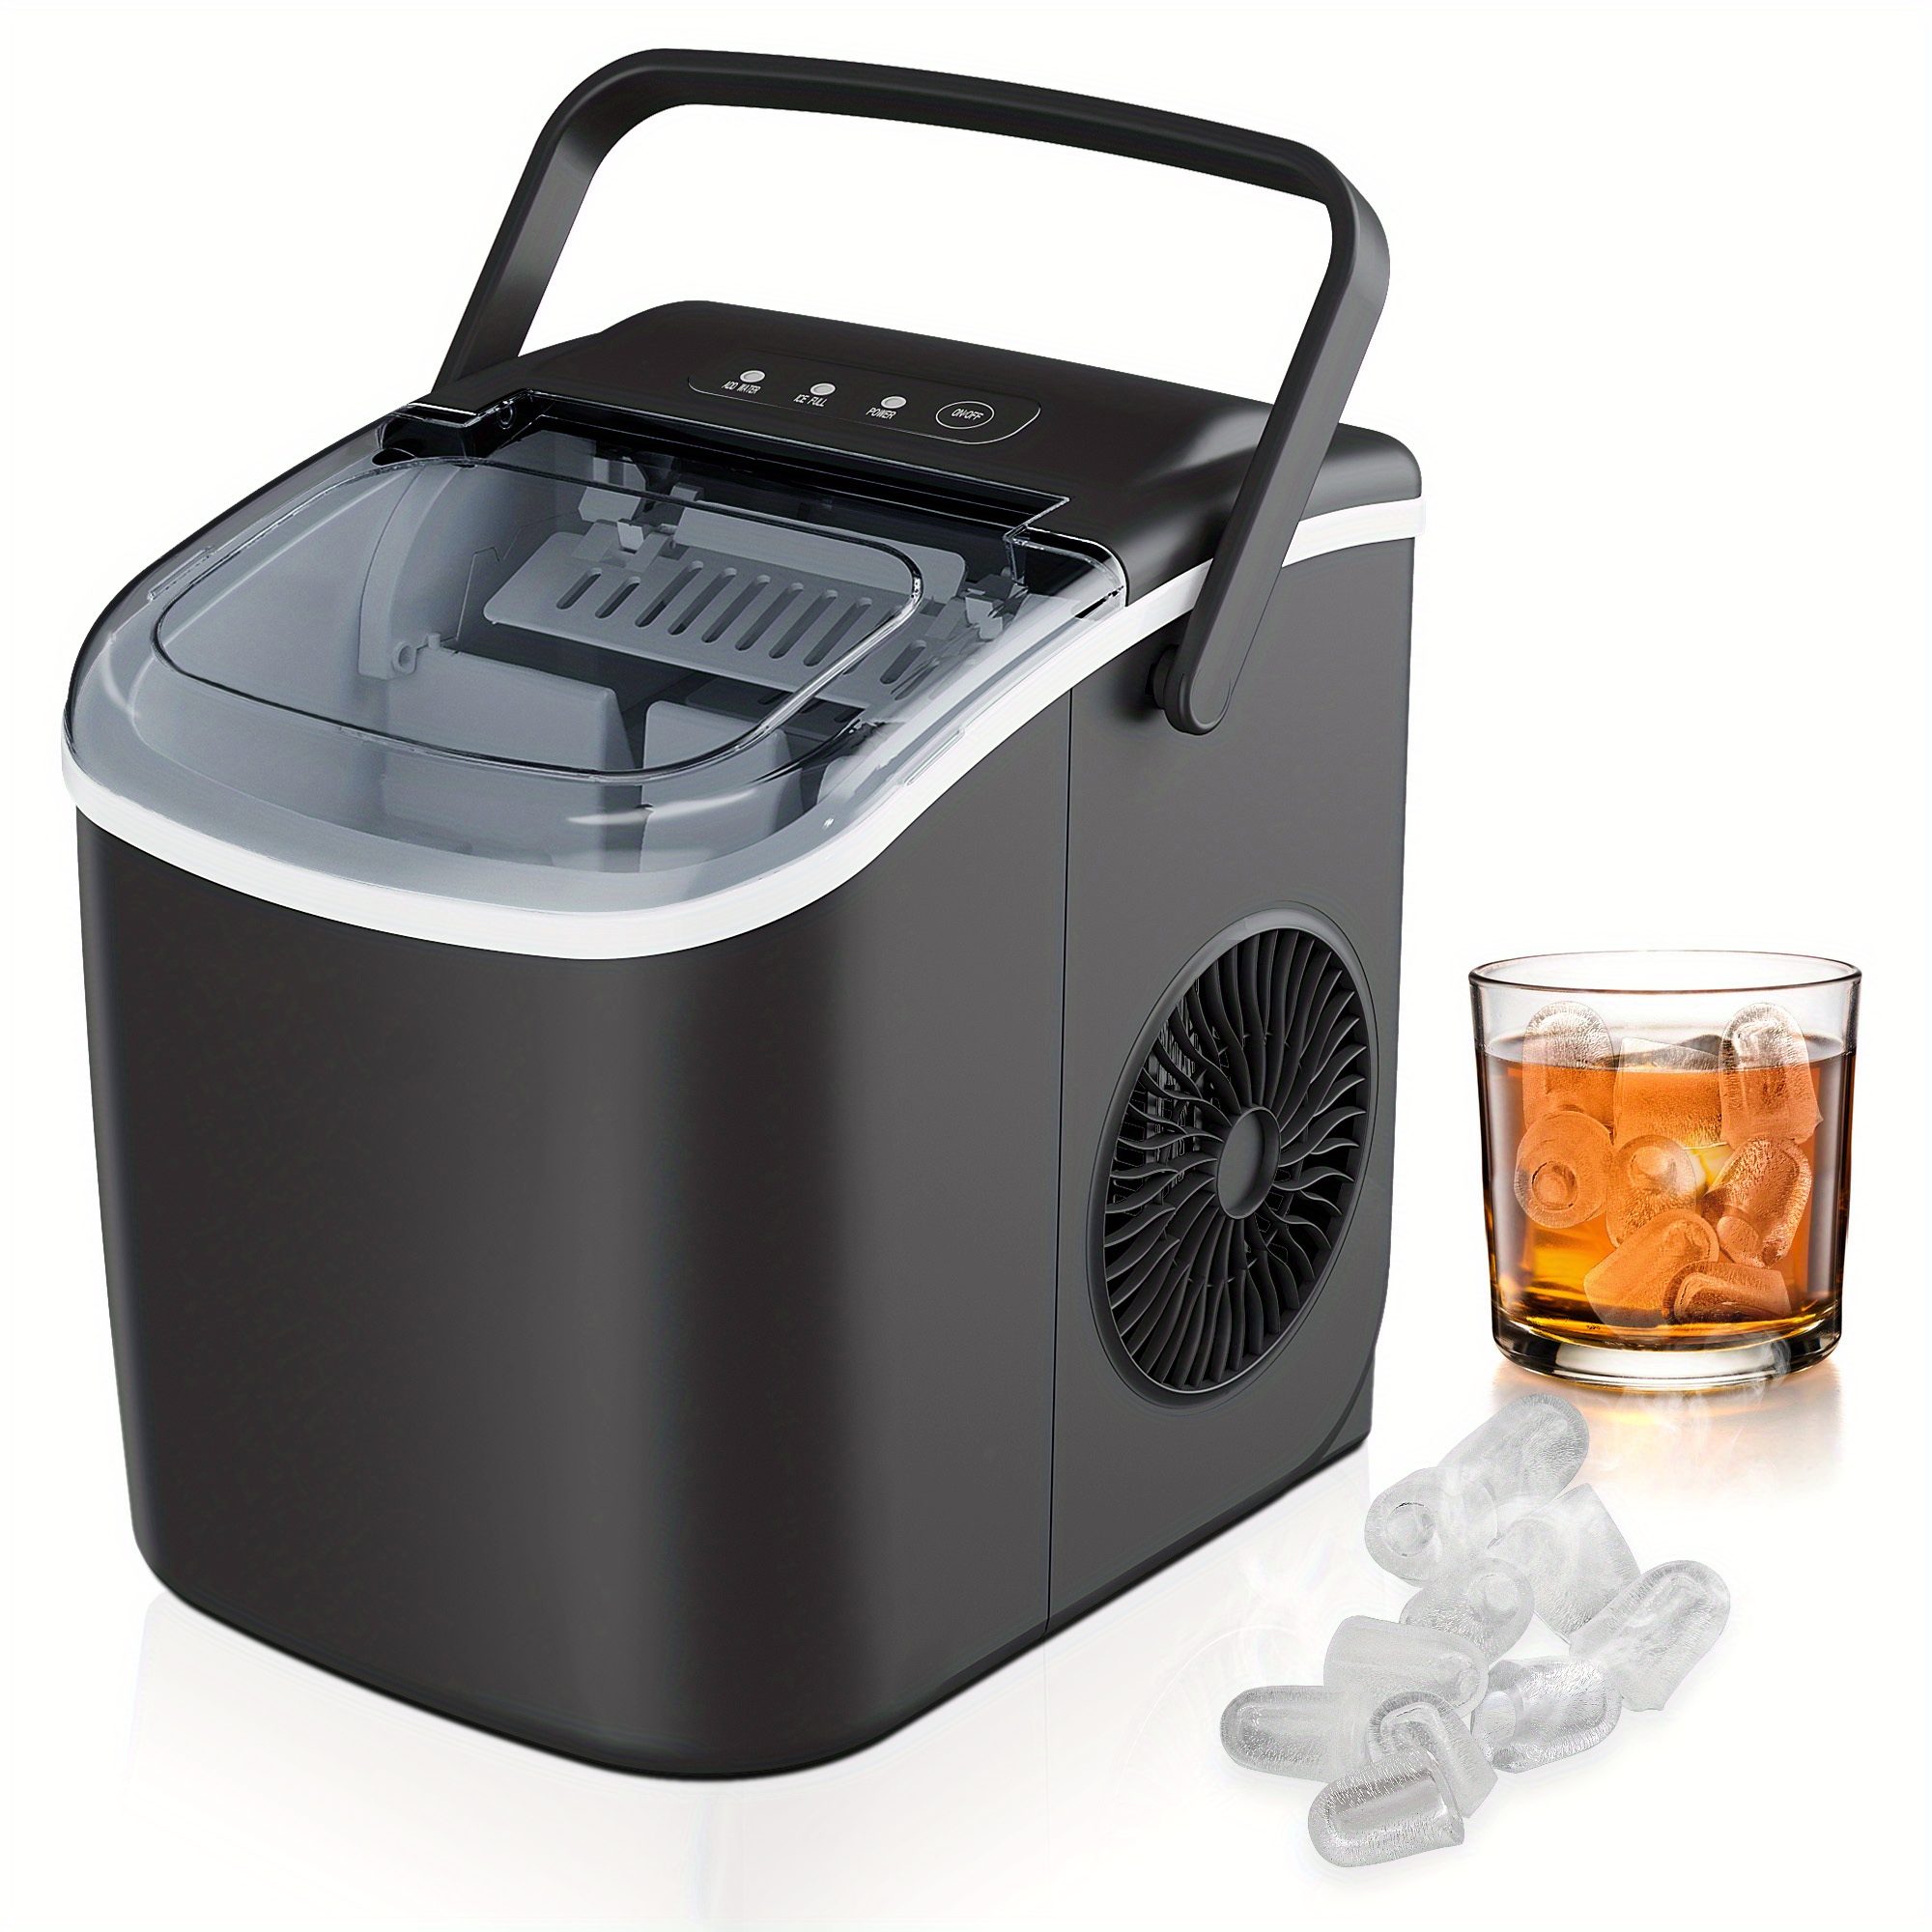 

Portable Countertop Ice Maker With Handle, Produces 26lbs Of Ice In 24hrs, 9 Ice Cubes Ready In 6 Mins, Features Auto-cleaning, Includes Basket And Scoop, Ideal For Home, Kitchen, Camping, Rv - Black.